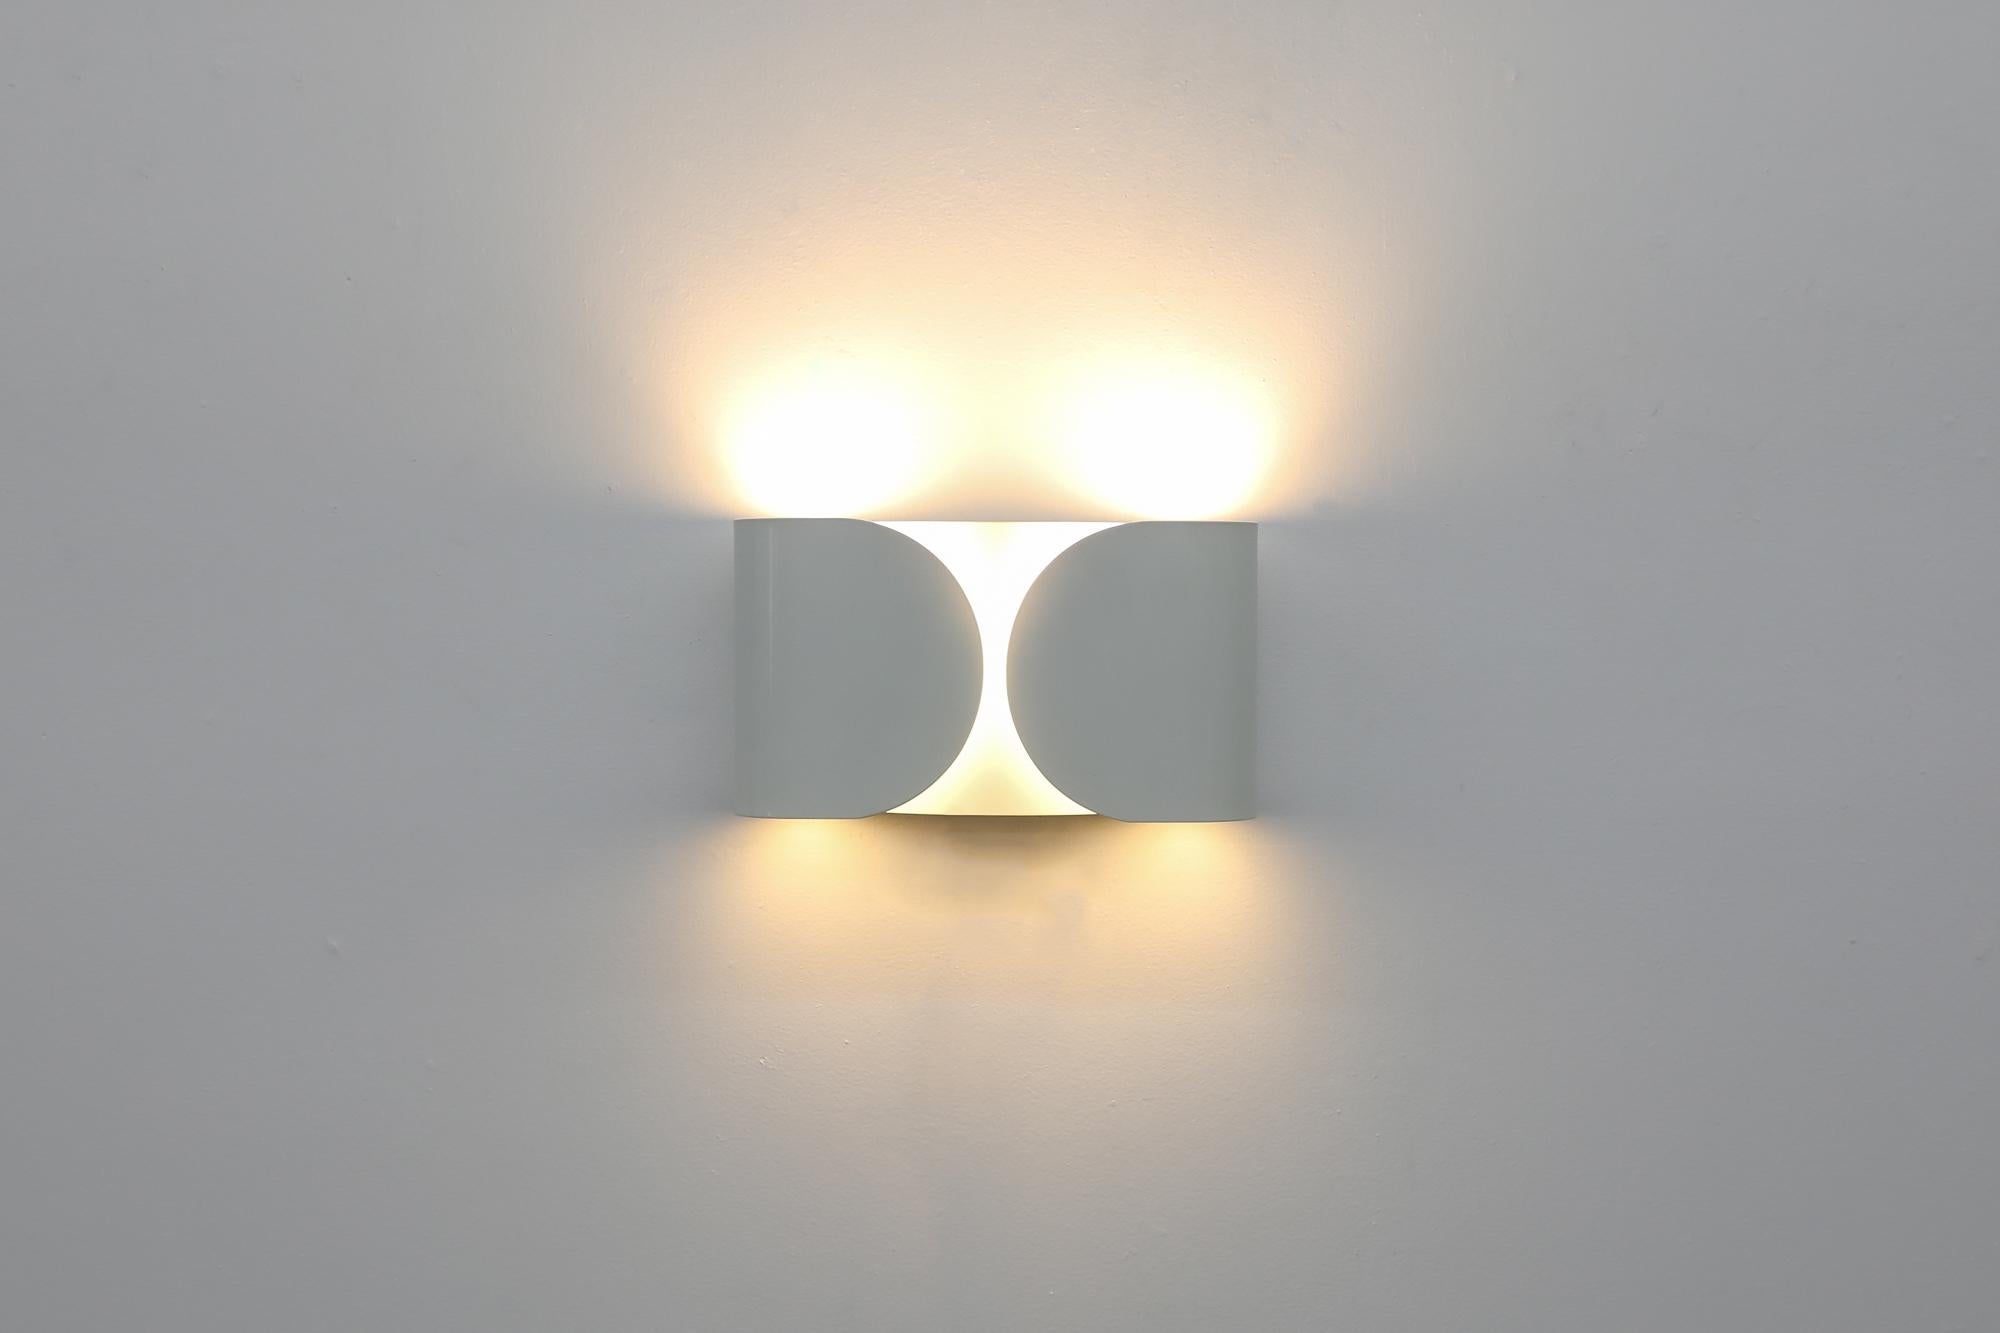 Original 1960s TS-Foglio wall mounted sconce designed by Tobia Scarpa for Flos. Scarpa's history was closely connected to Flos: He was one of the first designers to be invited to the company right after its foundation in Merano, Italy in 1960. One